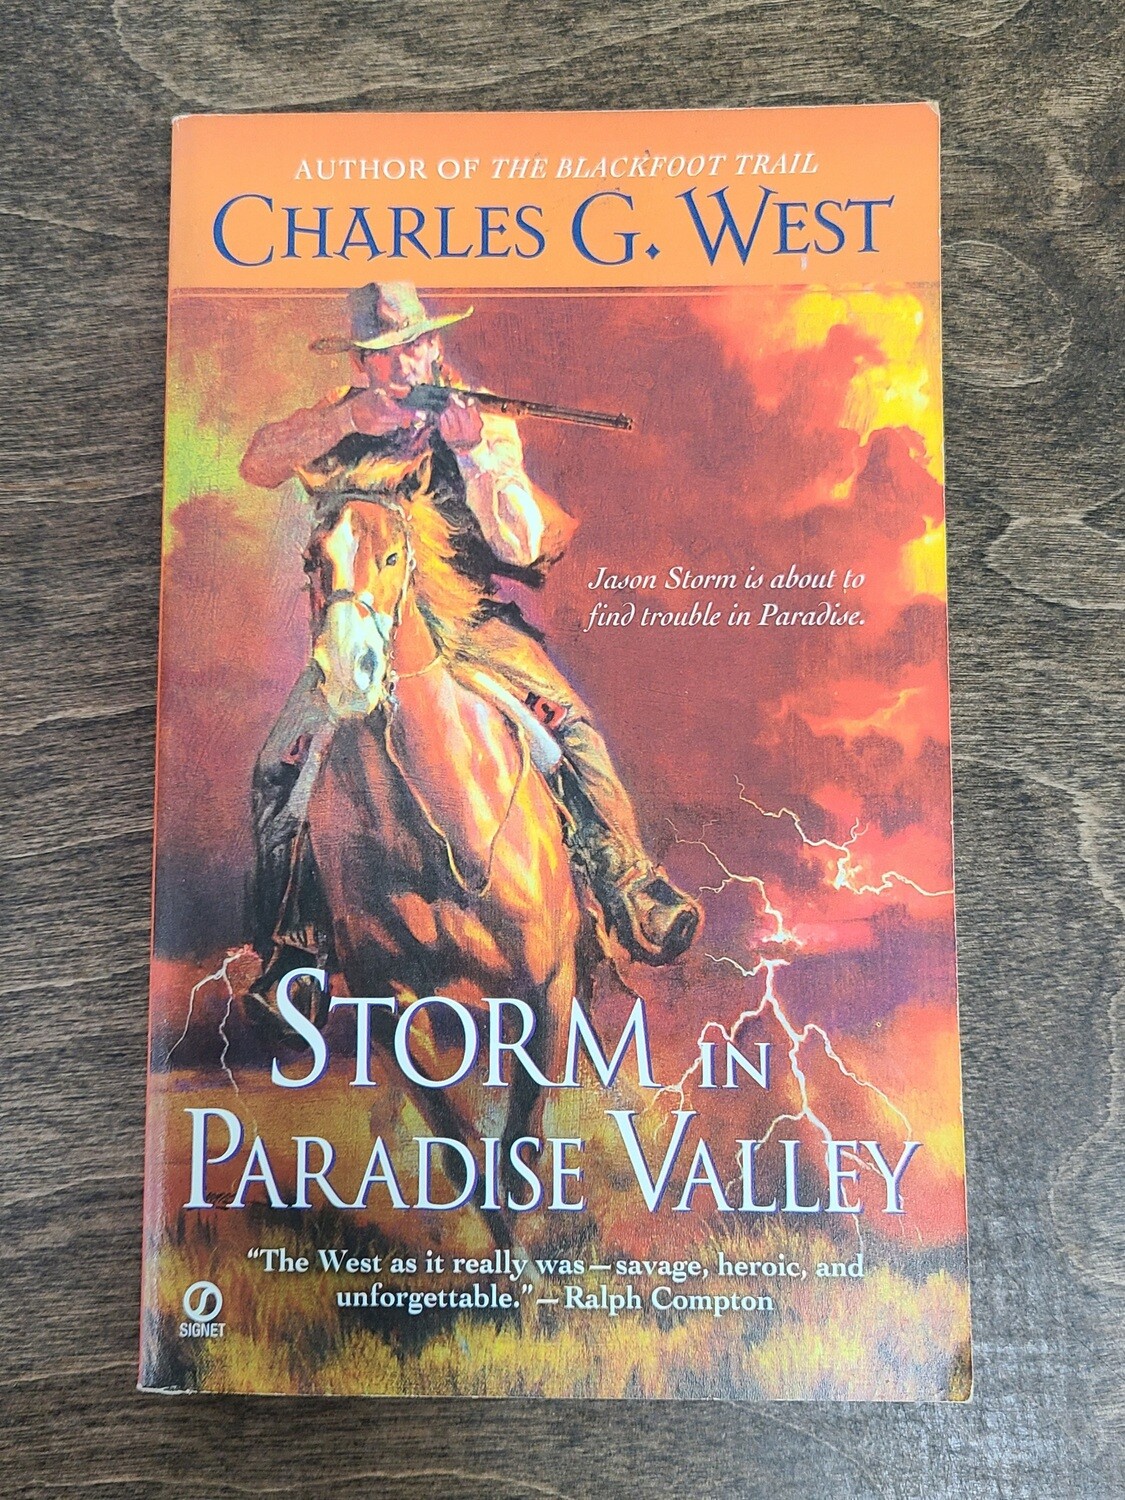 Storm in Paradise Valley by Charles G. West